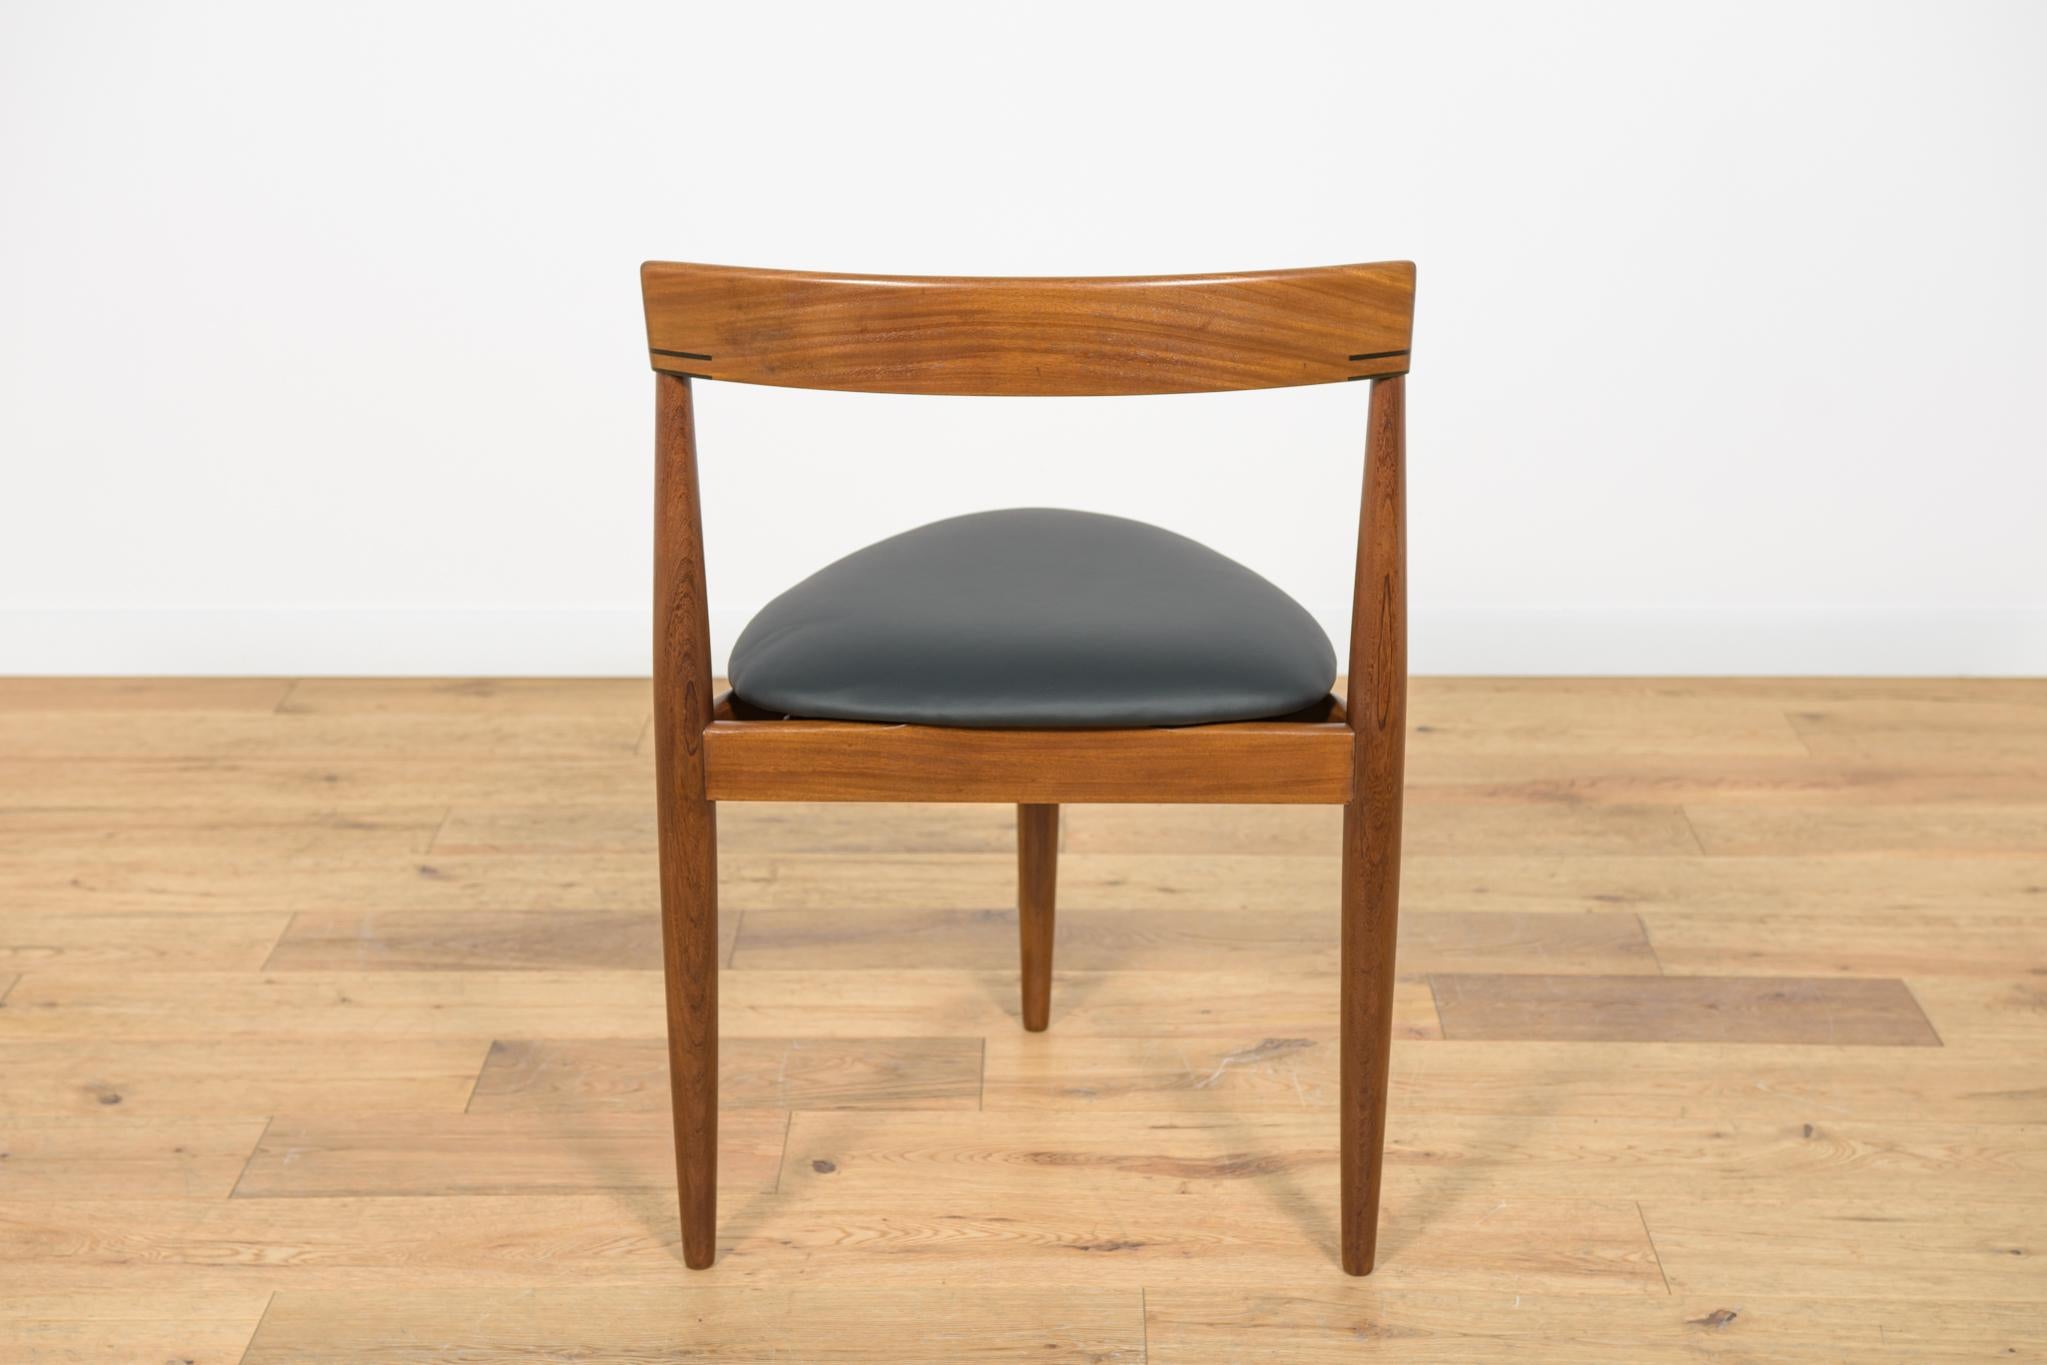  Mid-Century Teak Dining Table and Chairs Set by Hans Olsen for Frem Røjle. For Sale 3